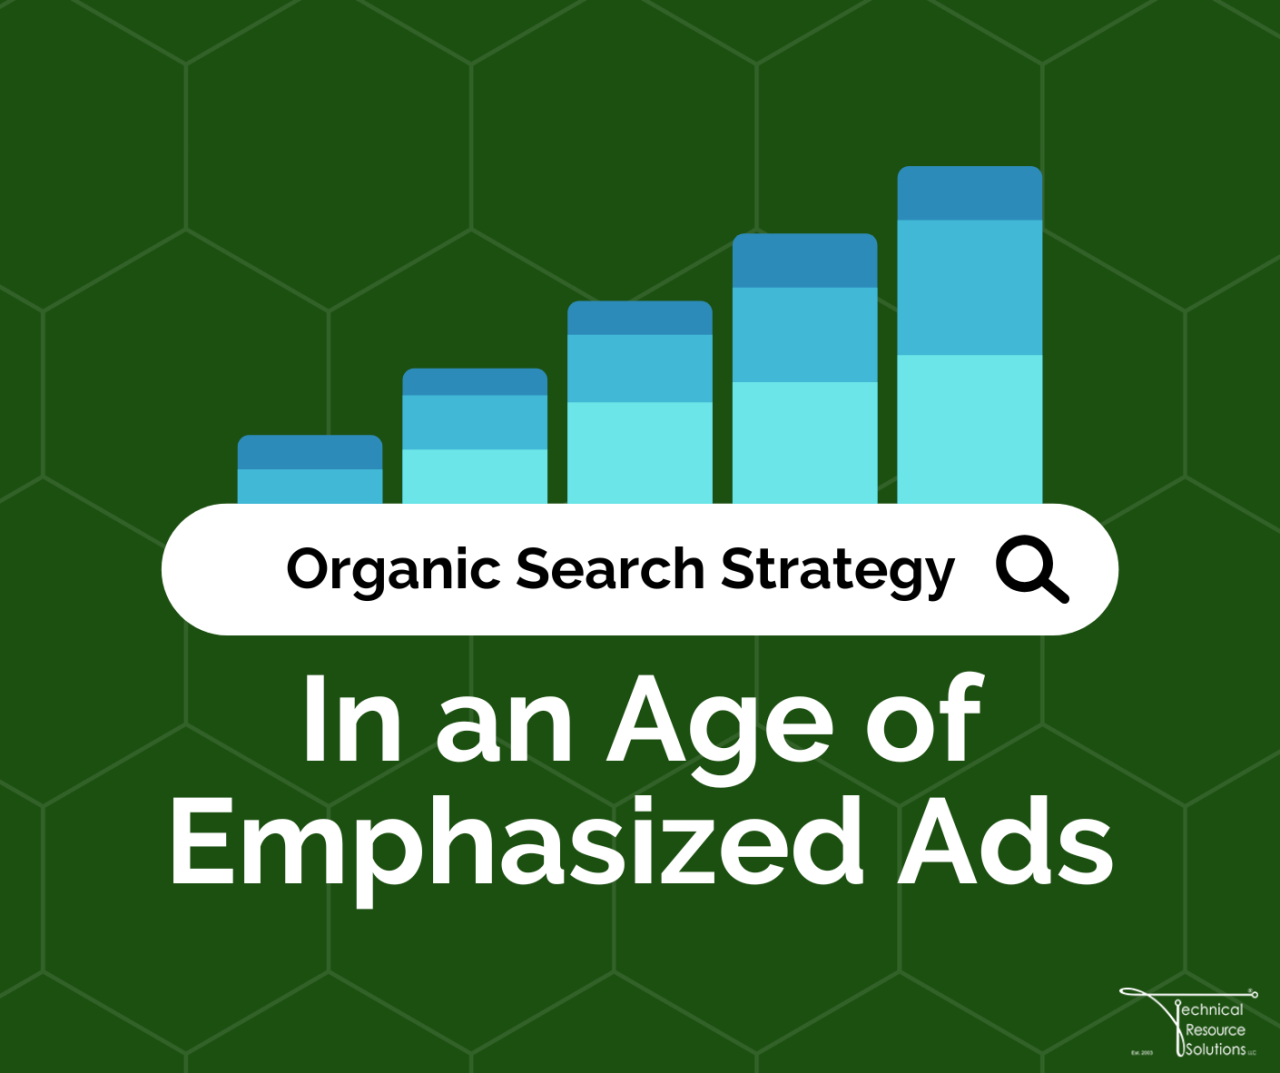 Organic Search Strategy in an Age of Emphasized Ads